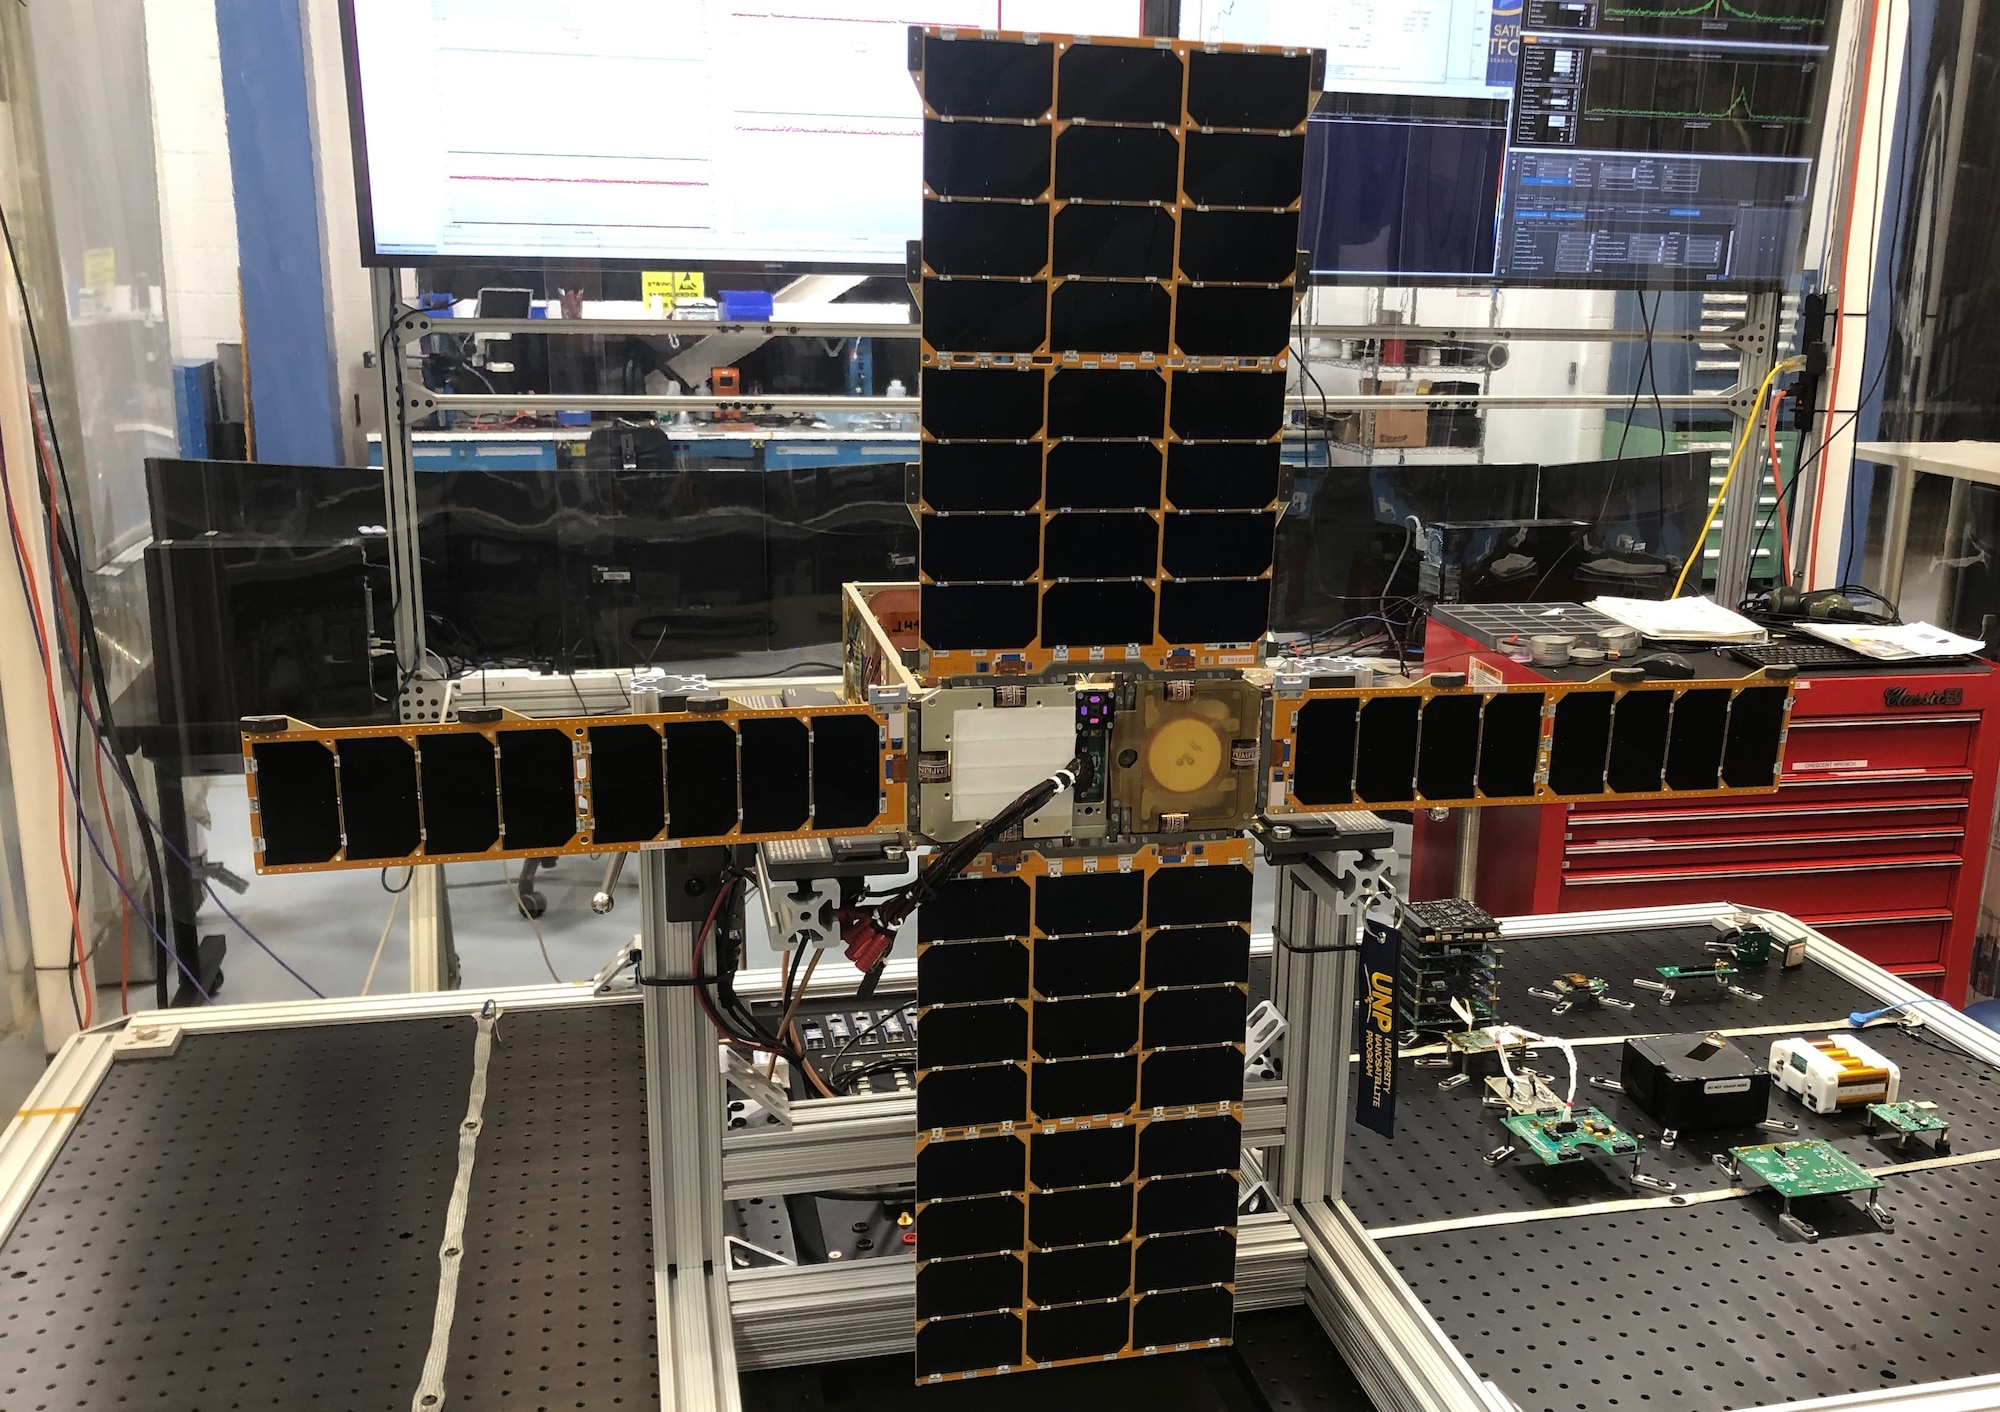 The Very Low Frequency Propagation Mapper with solar panels deployed, at the Air Force Research Laboratory on Kirtland Air Force Base N.M. Jan. 29, 2020. The VPM will be released from the International Space Station at 9:15 a.m. EST, Jan. 31 2020.  The release can be viewed on NASA TV at https:///www.nasa. (U.S. Air Force photo courtesy of Air Force Research Laboratory)